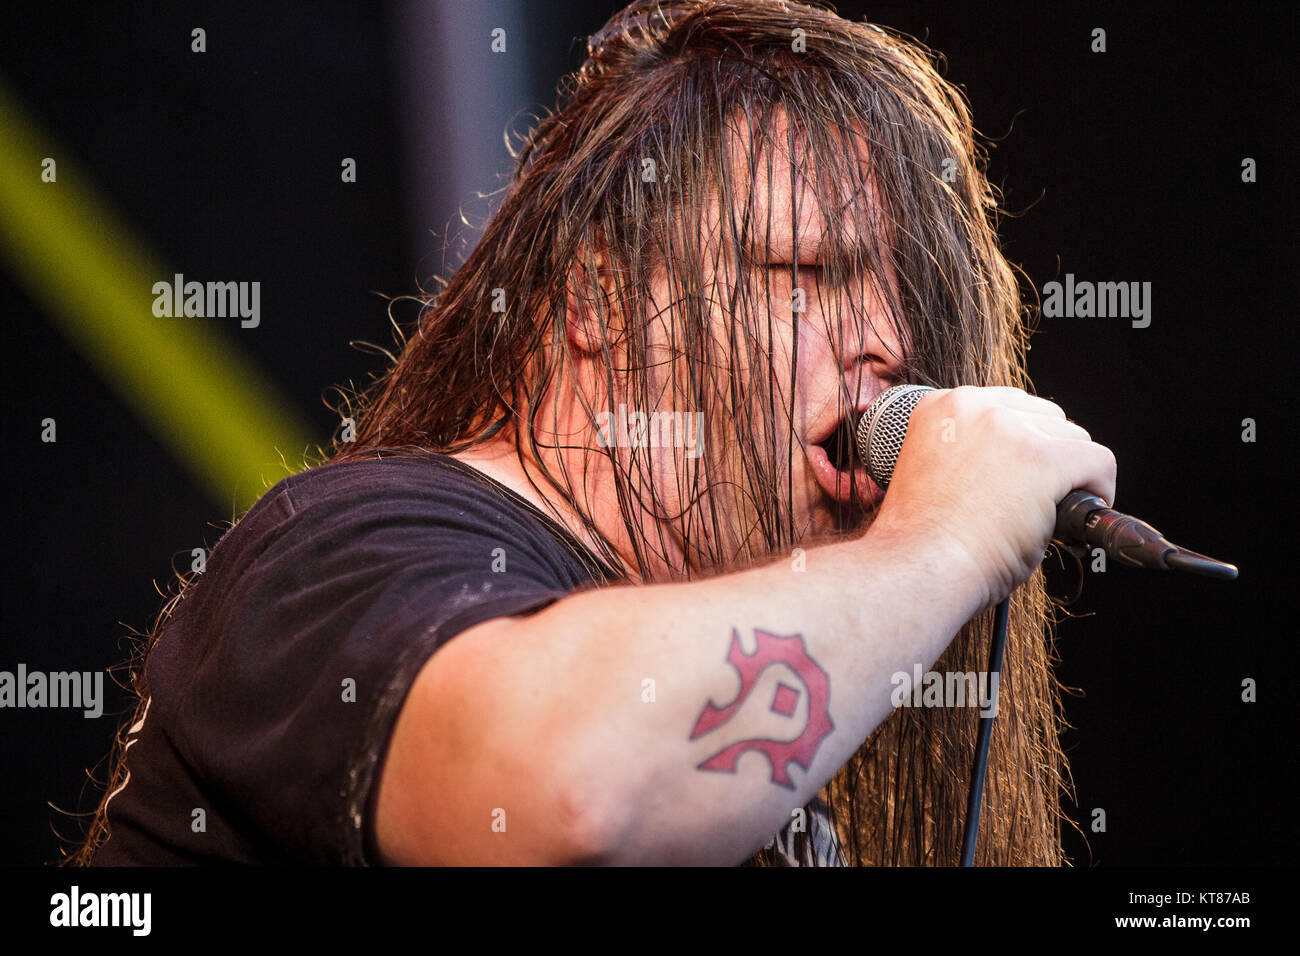 The American death metal band Cannibal Corpse performs a live concert at the Danish heavy metal festival Copenhell 2015 in Copenhagen. Here vocalist George Fisher, also known as  Corpsgrinder, is seen live on stage. Denmark, 18/06 2015. Stock Photo